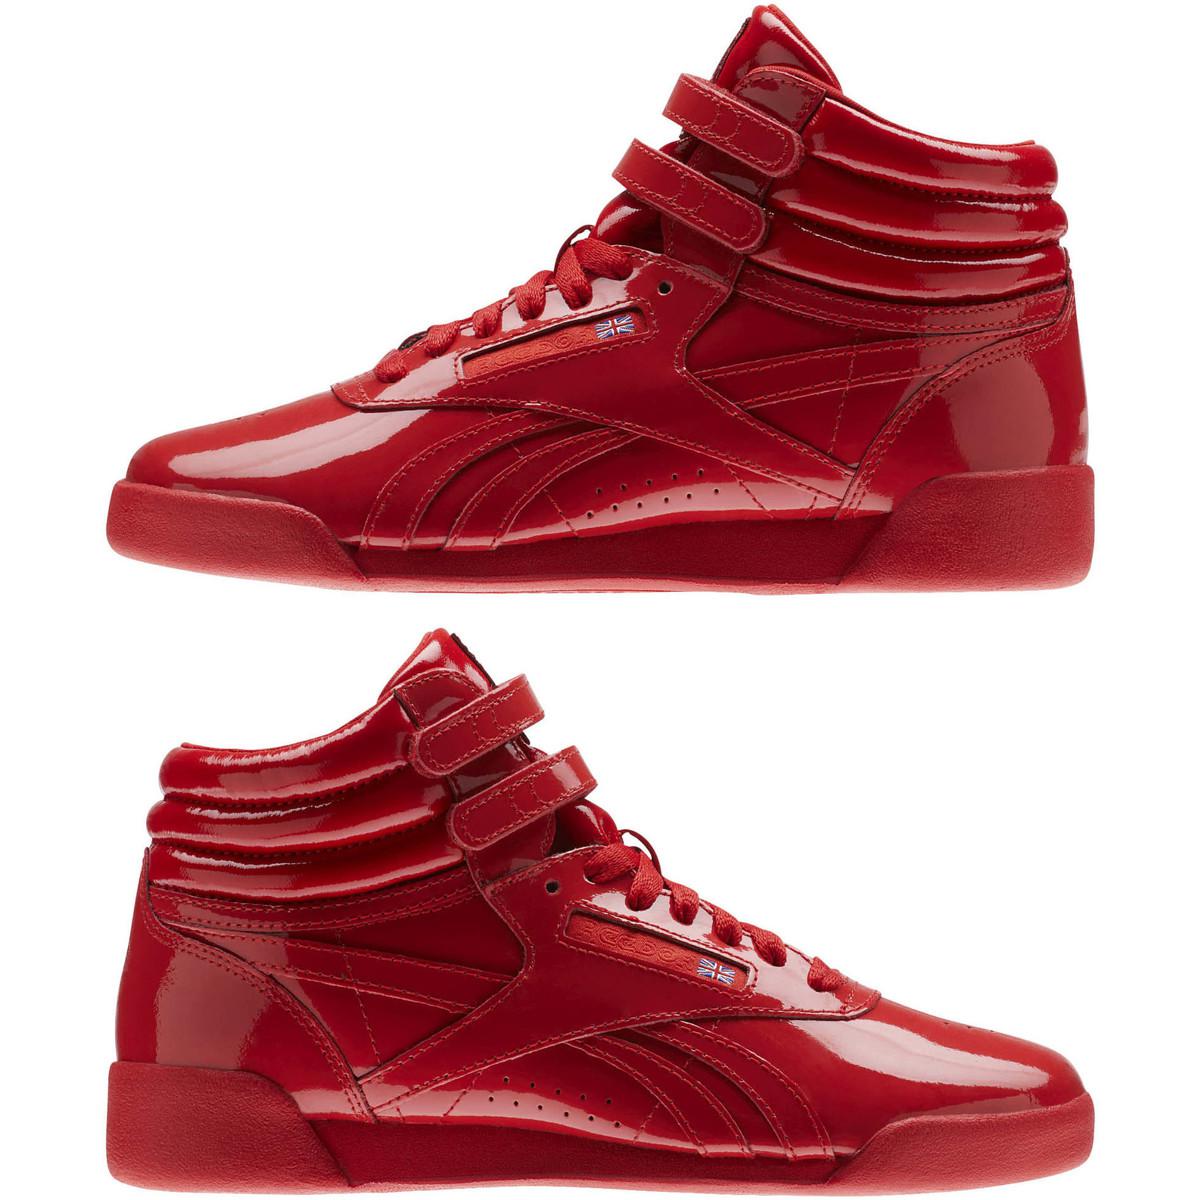 Reebok Freestyle Hi Patent Leather Cn2078 Women's High Boots In Red - Lyst